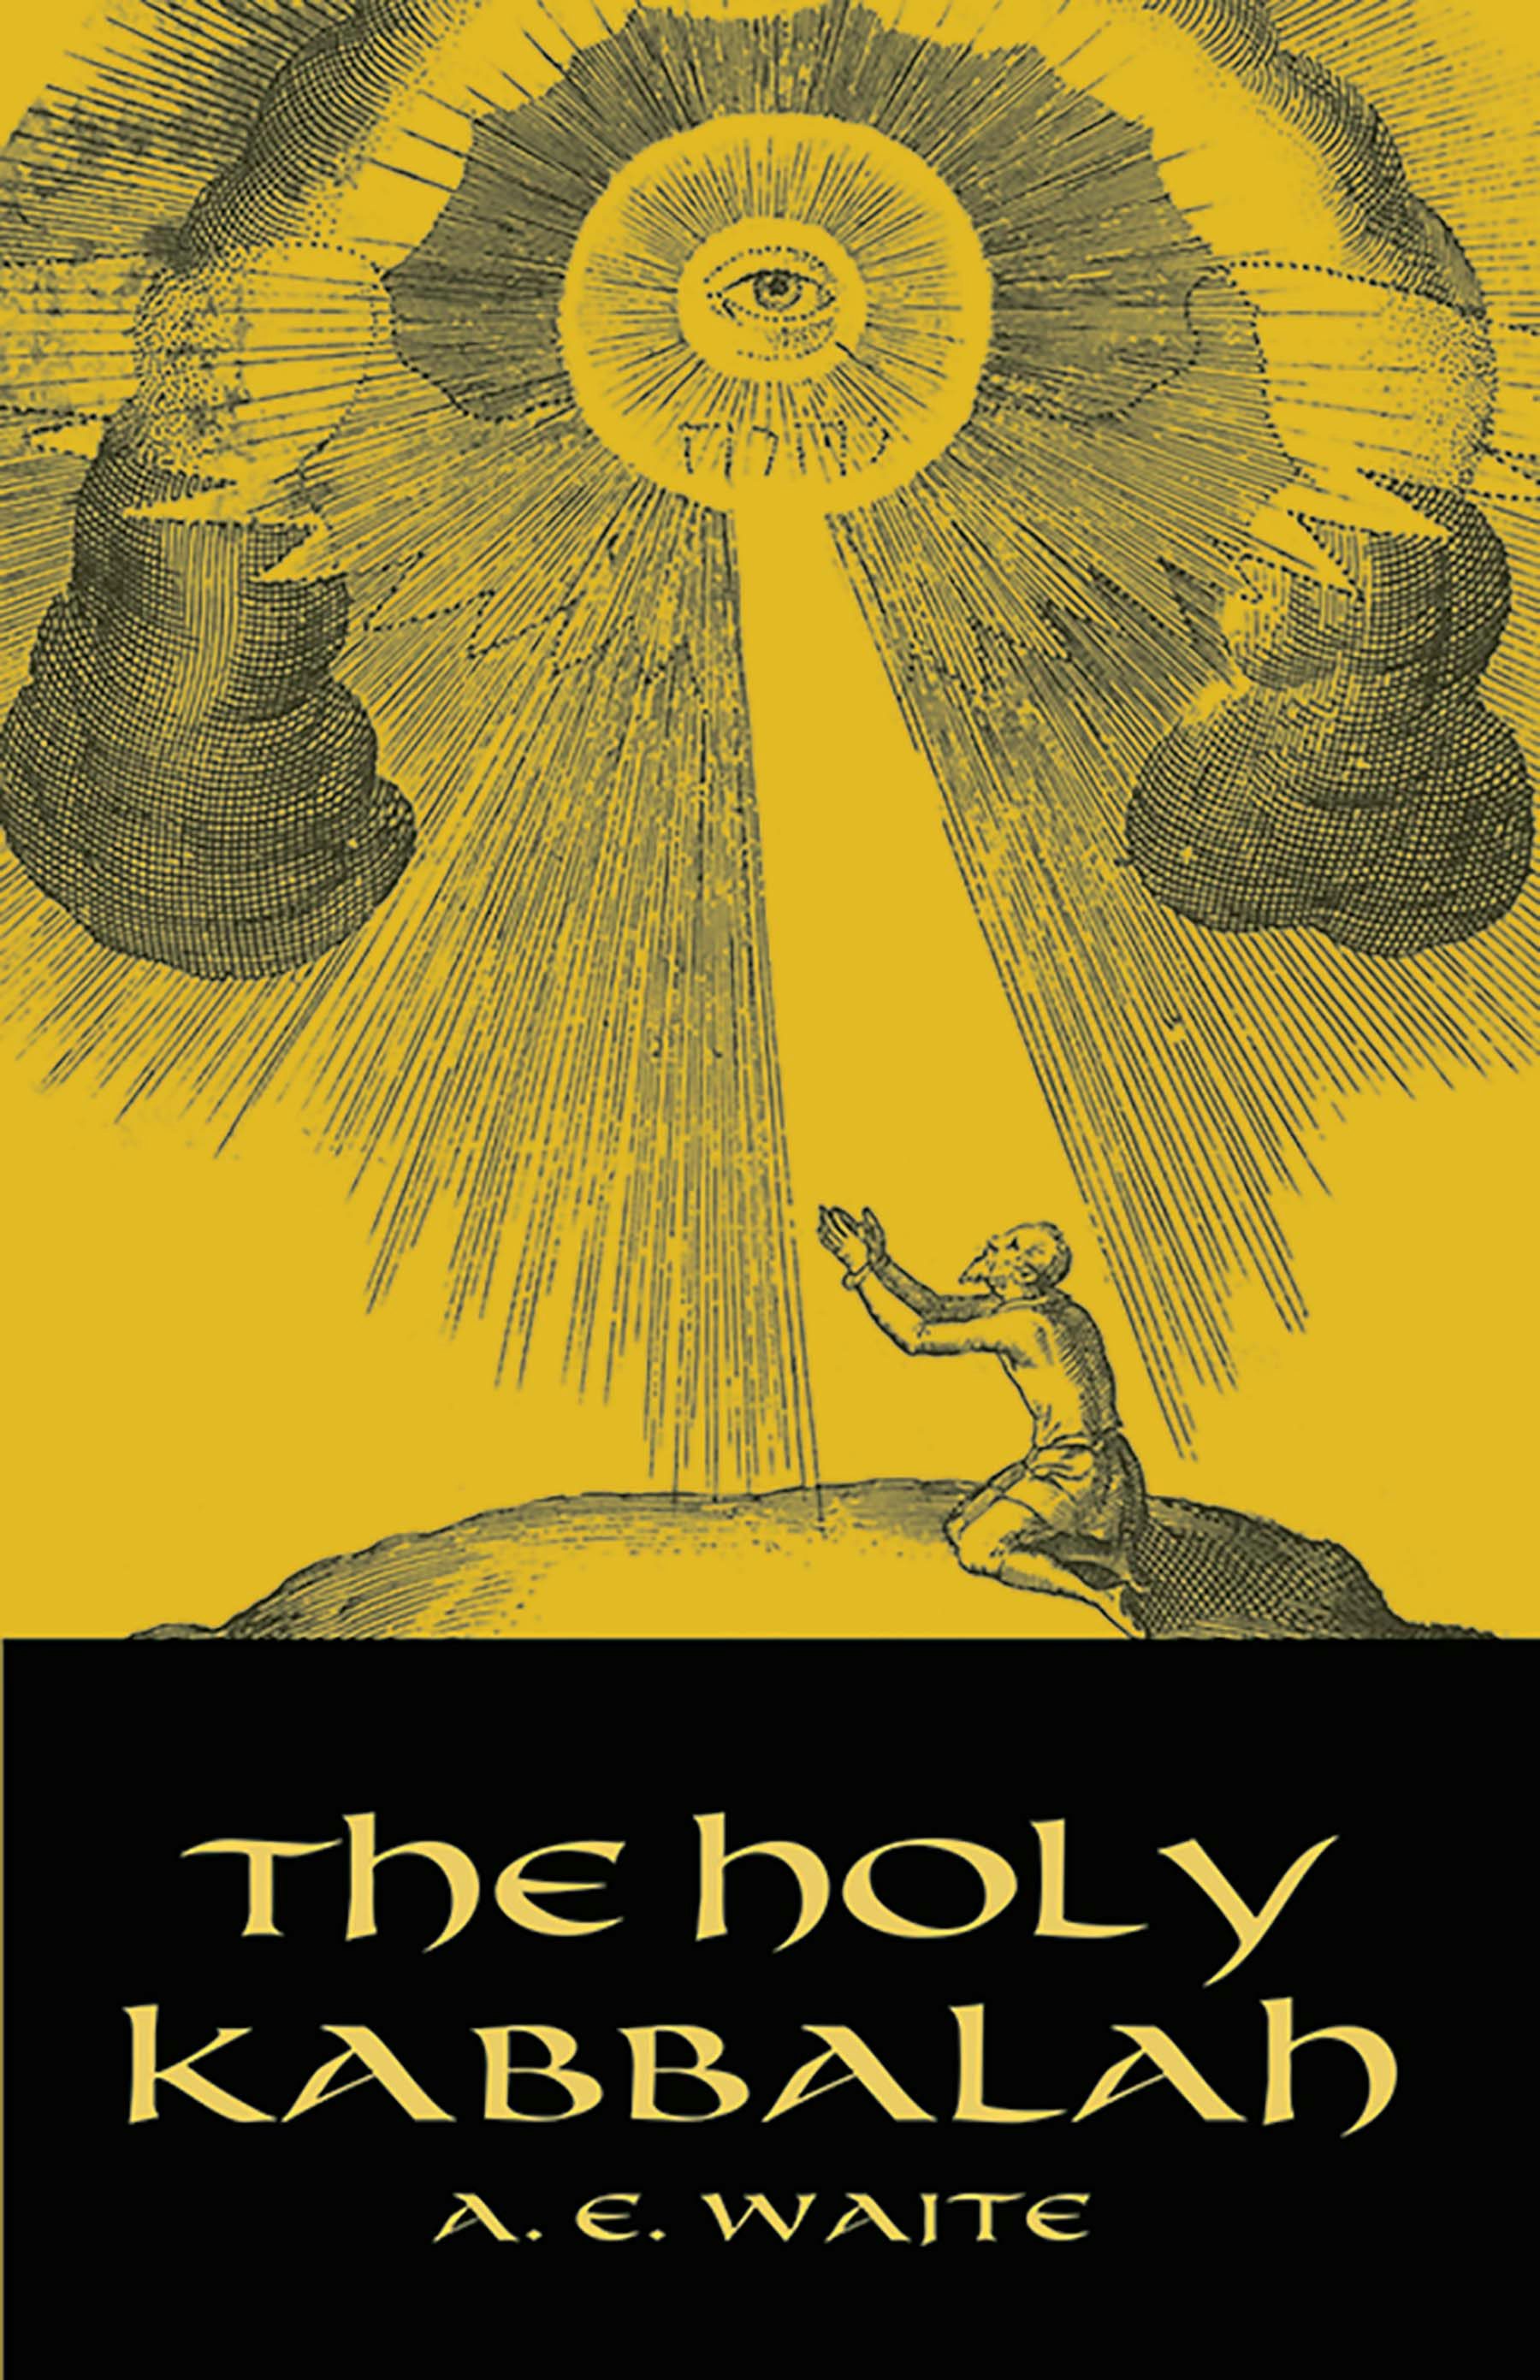 The Holy Kabbalah – Dover Publications